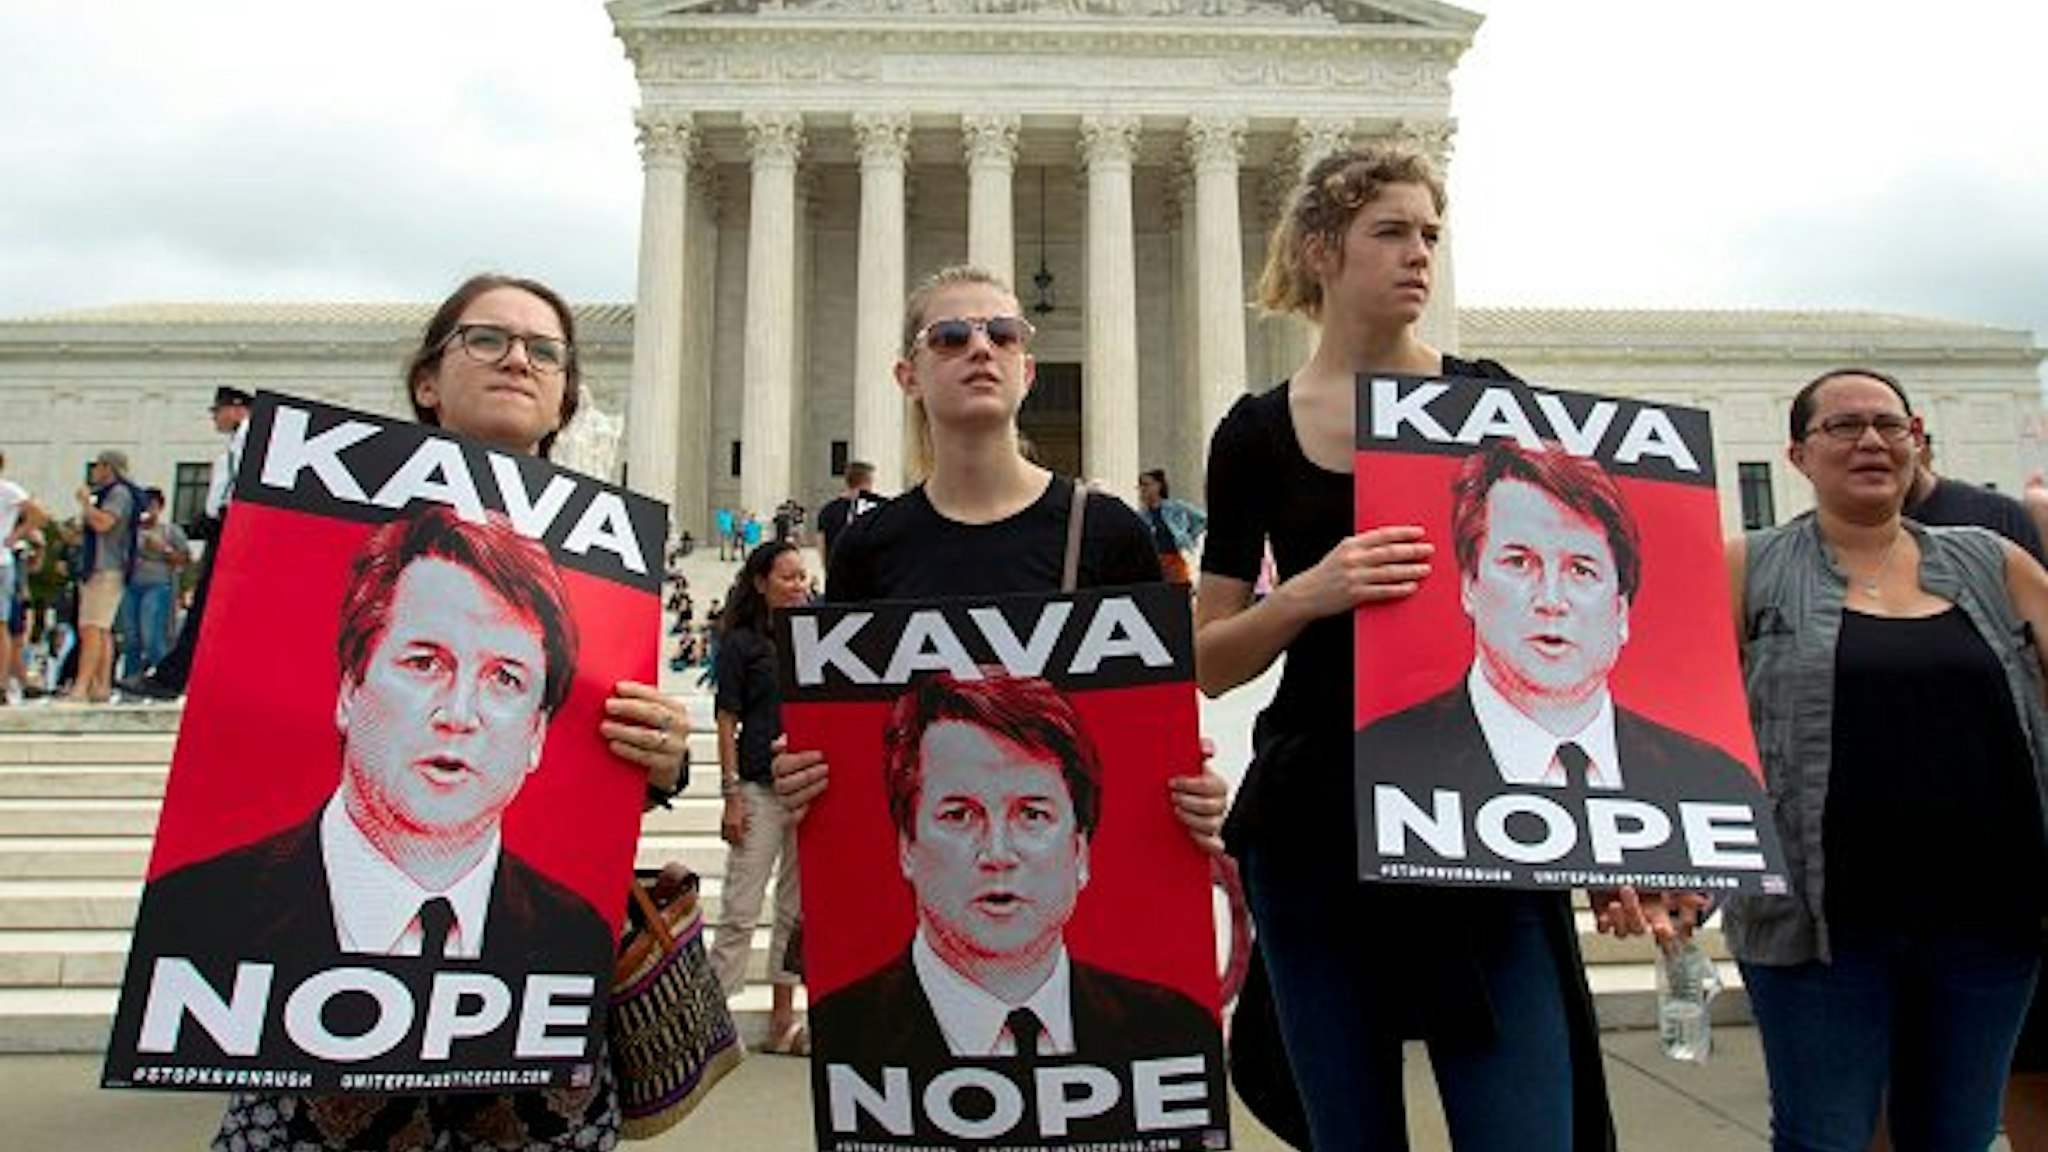 Protesters against US Supreme Court nominee Brett Kavanaugh demonstrate at the US Supreme Court in Washington, DC, on October 6, 2018.